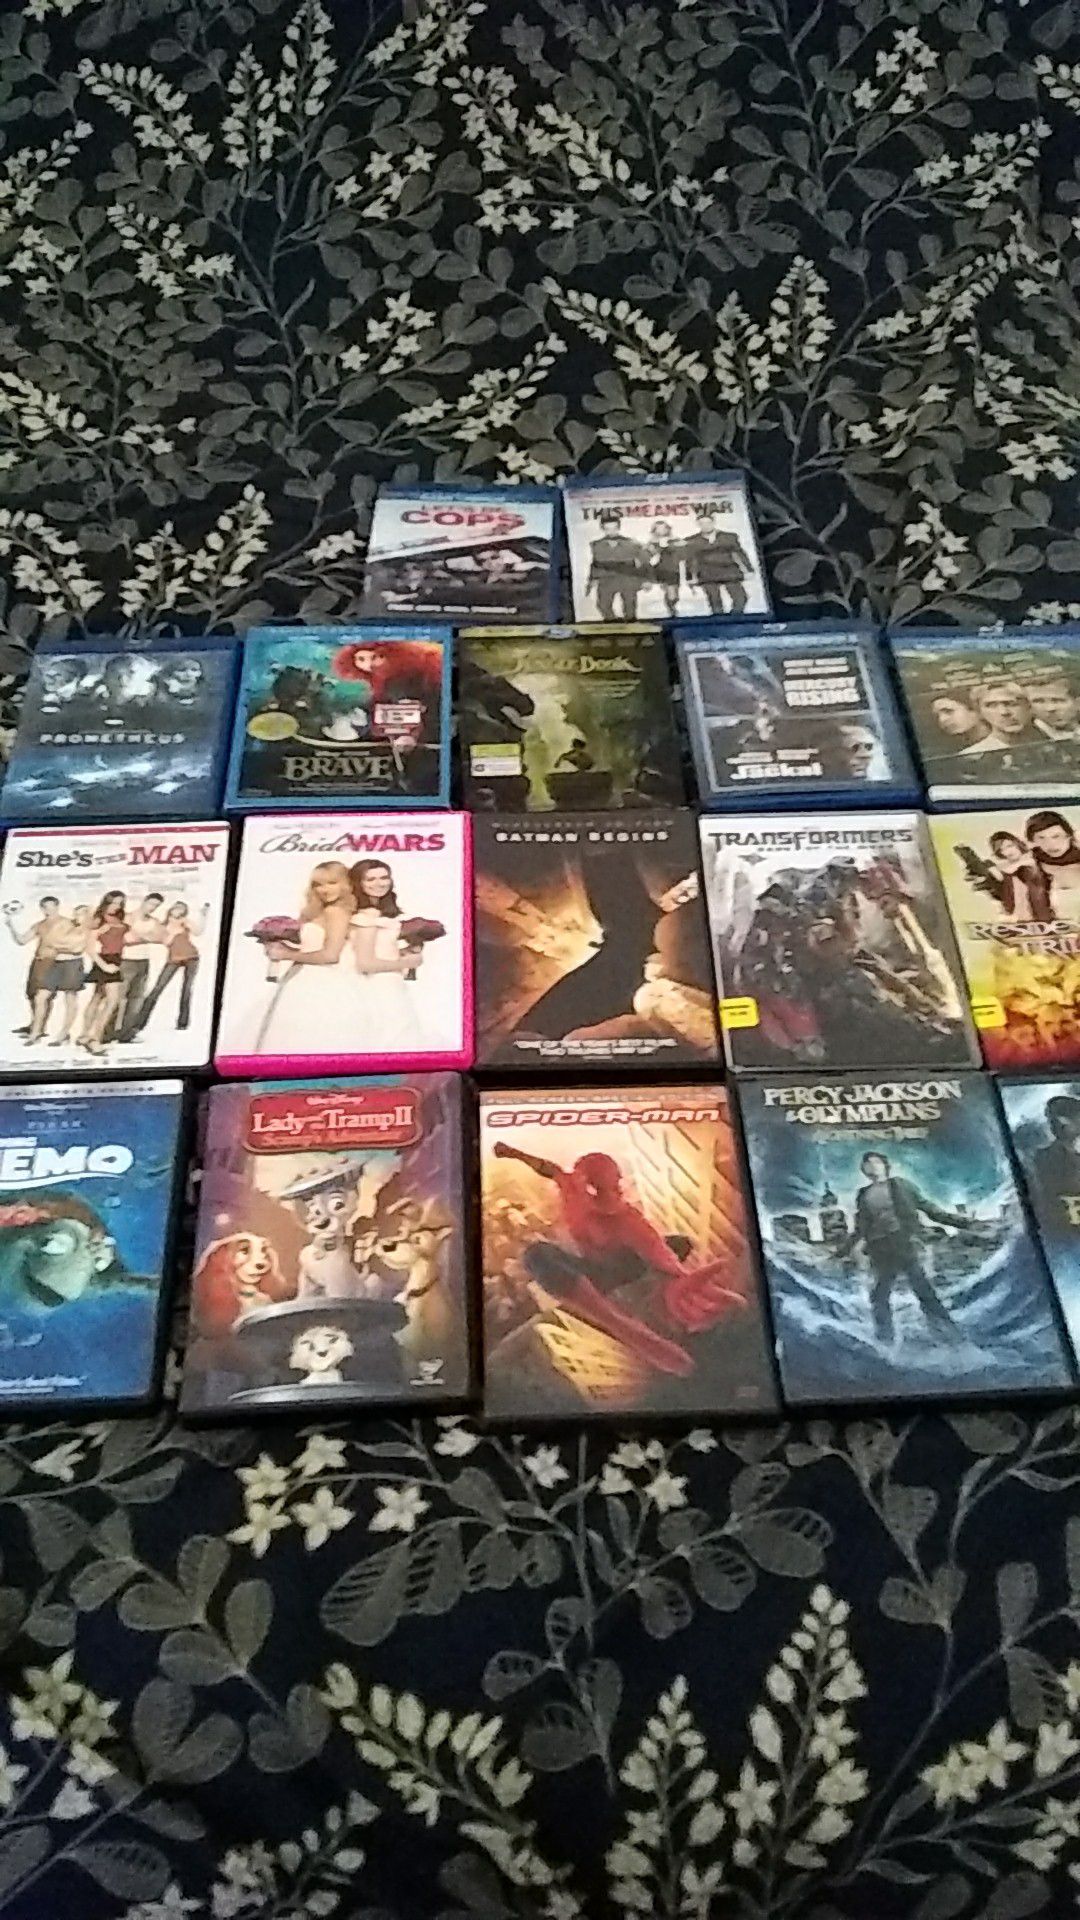 DVDs some blue ray